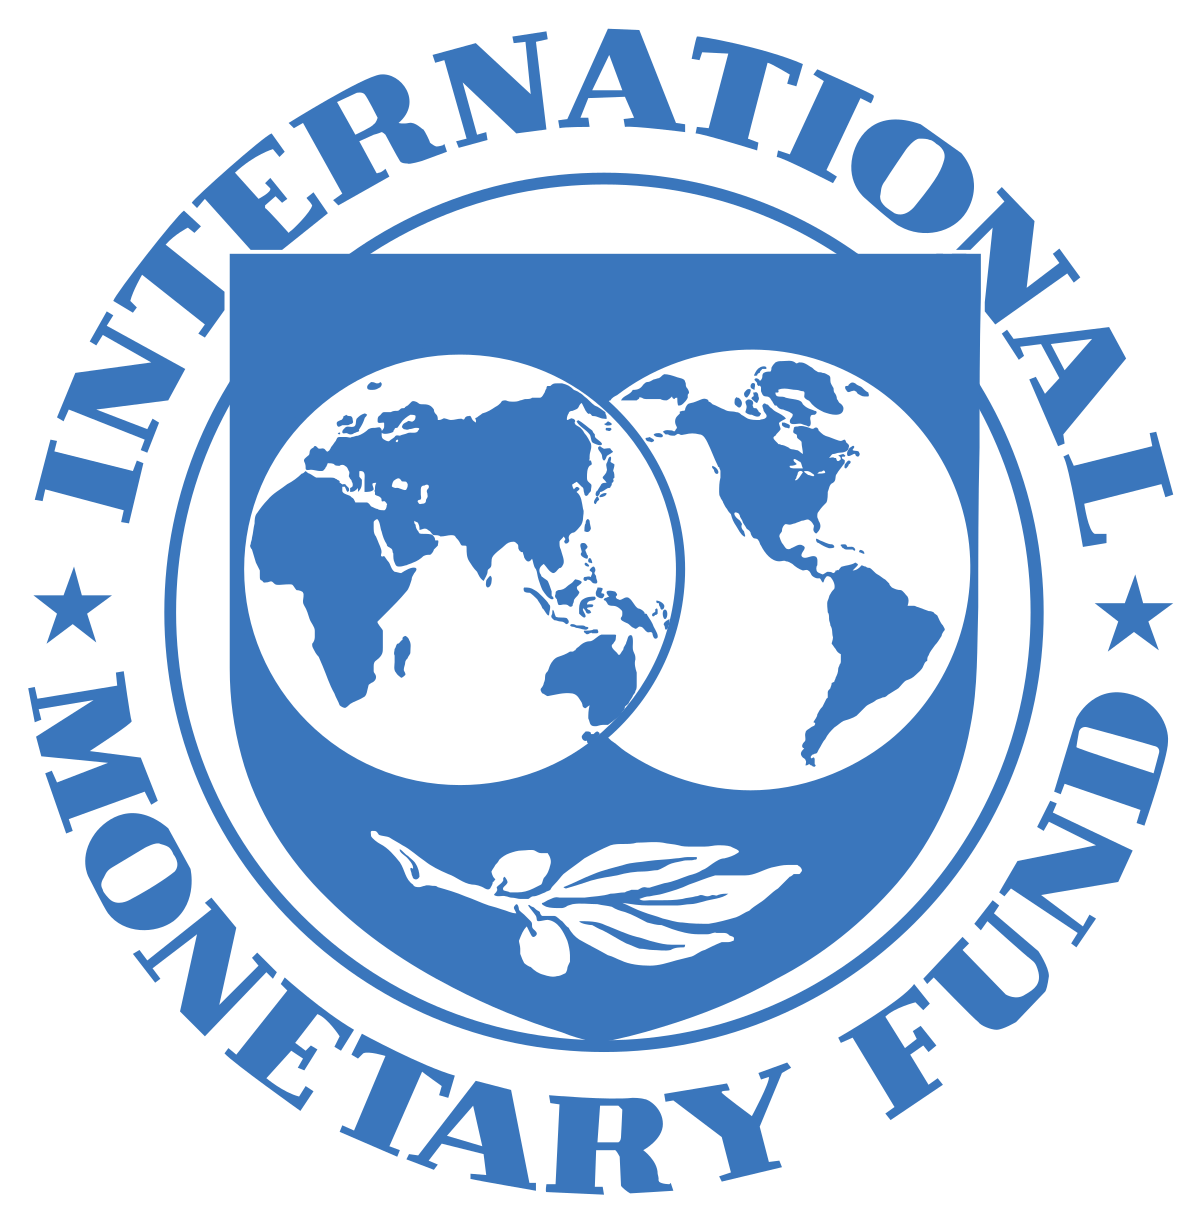 IMF cuts world economic growth forecasts as import tariffs, emerging market issues bite